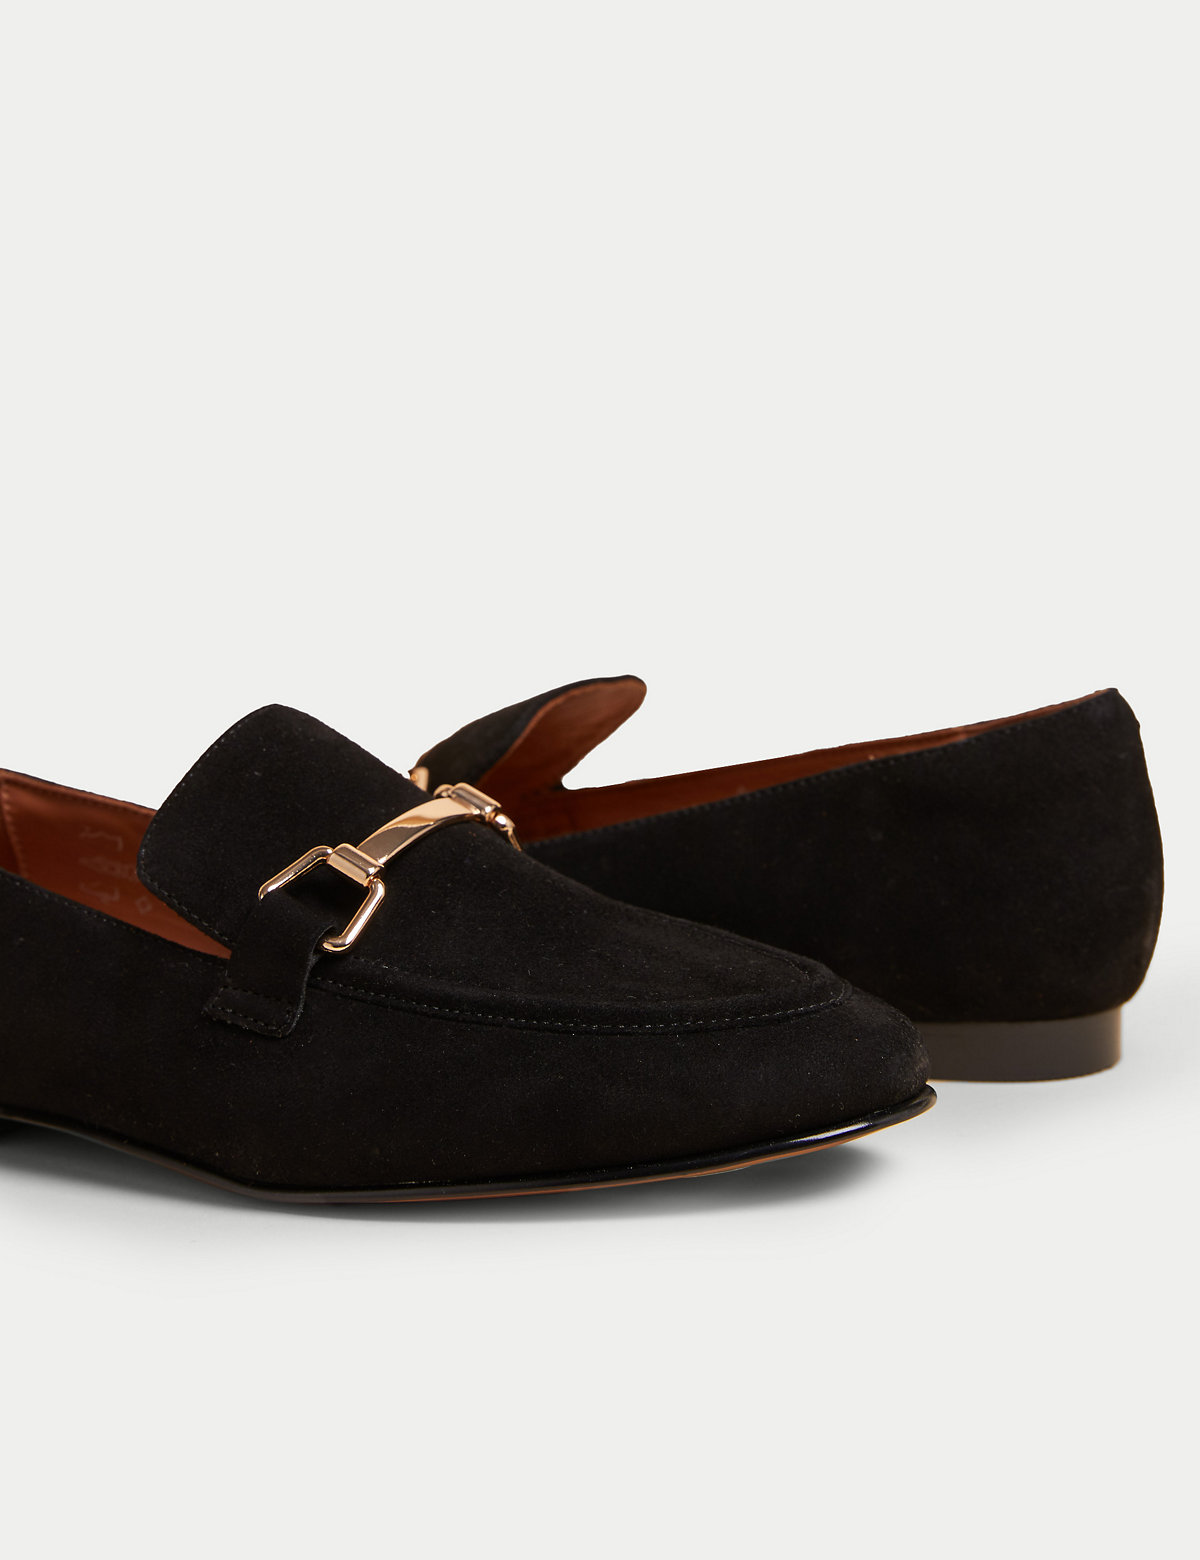 Suede Stain Resistant Bar Trim Loafers